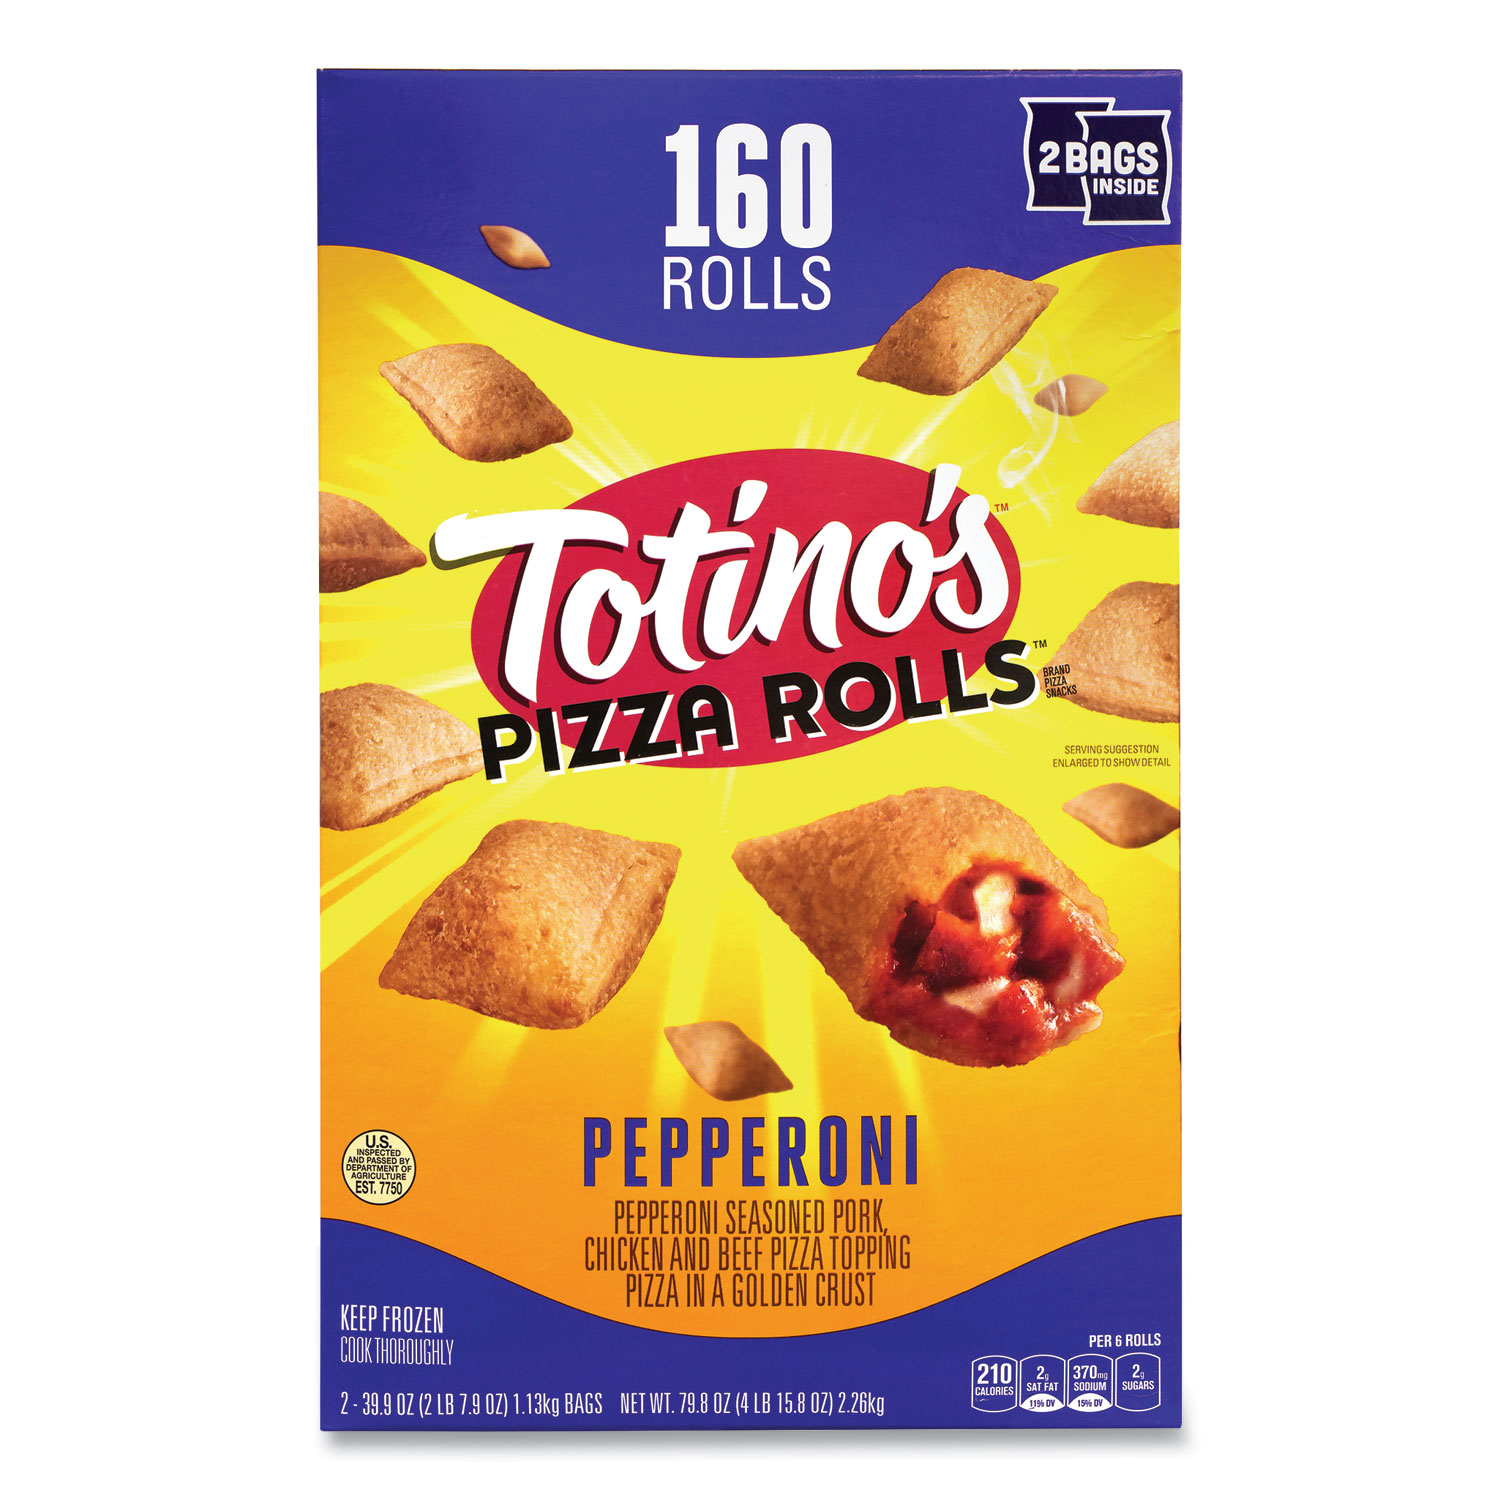  Totino’s Pizza Rolls 49481 Pepperoni Pizza Rolls, 39.9 oz Bag, 80 Rolls/Bag, 2 Bags/Box, Free Delivery in 1-4 Business Days (GRR90300034) 